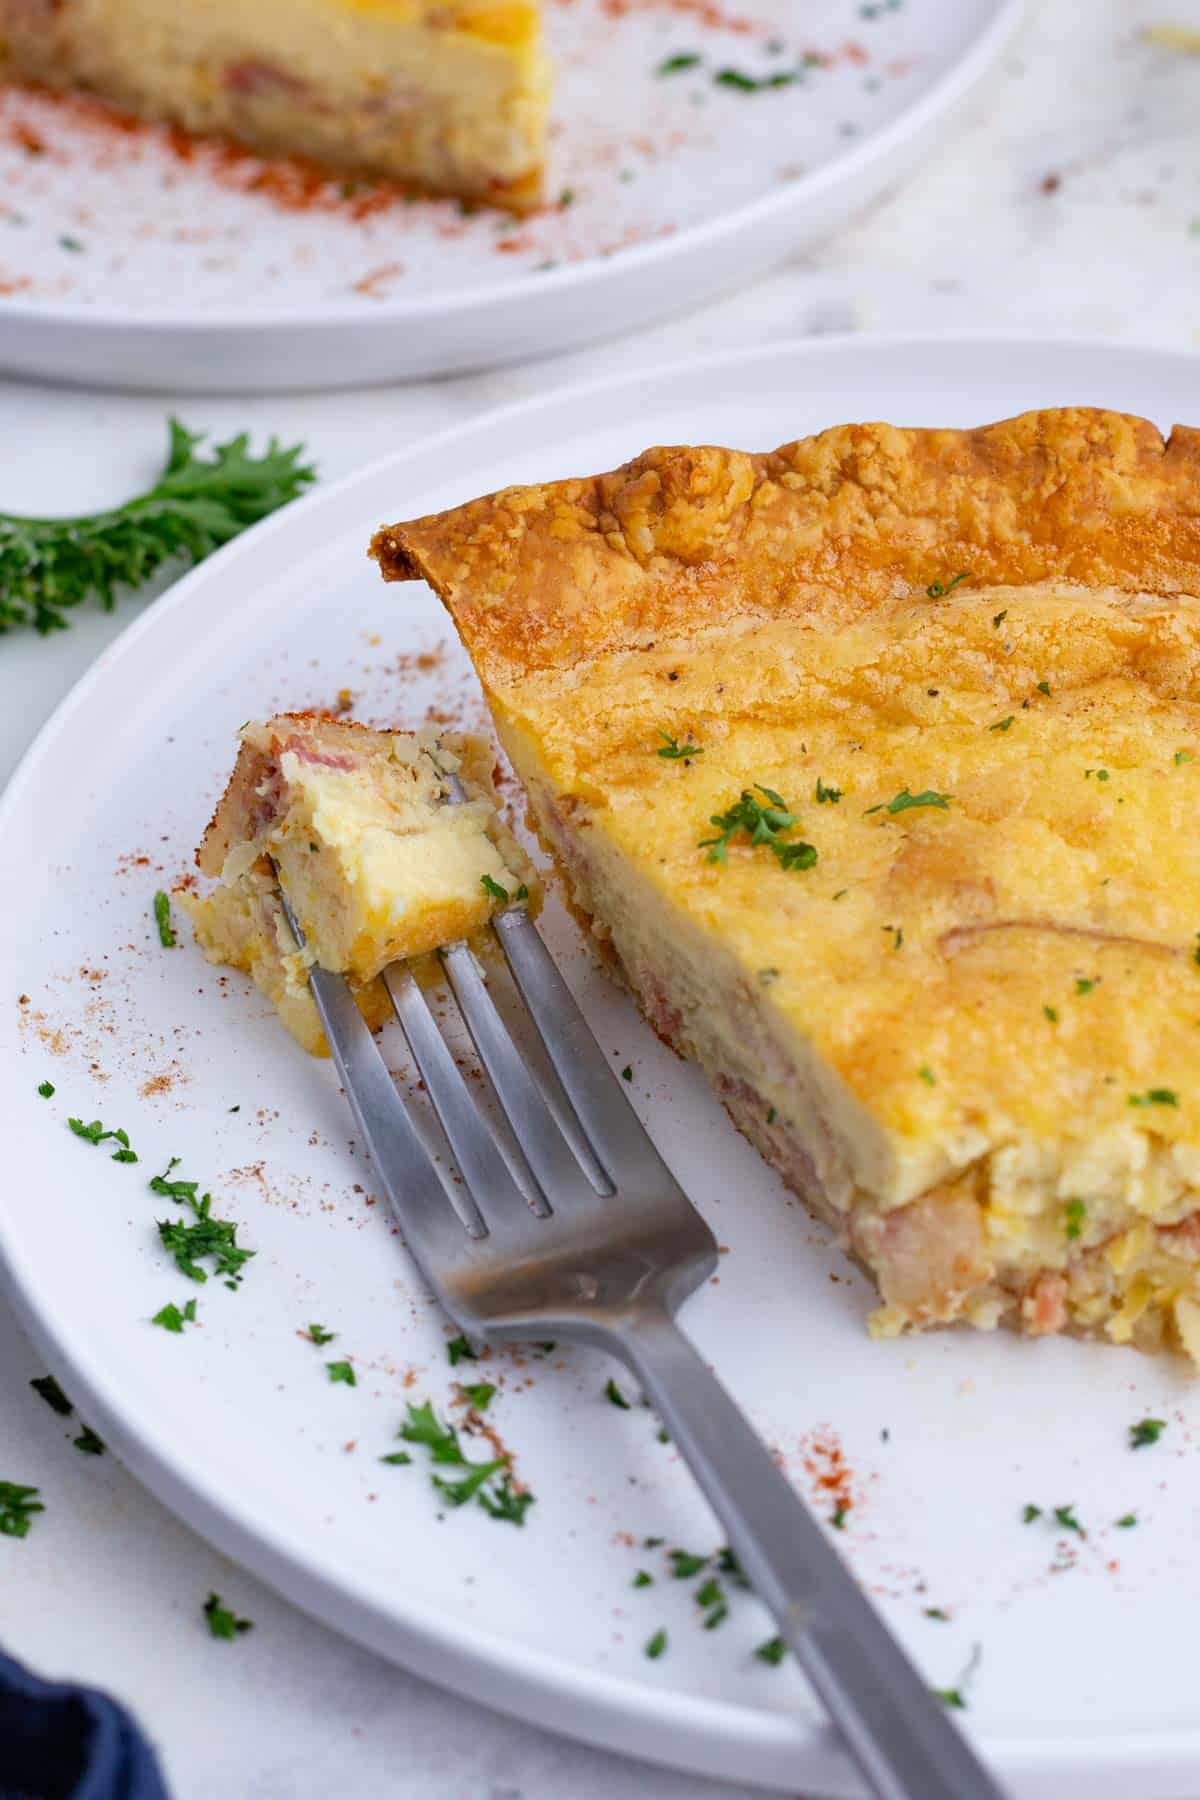 Enjoy this Quiche Lorraine recipe on holidays or any day of the week.